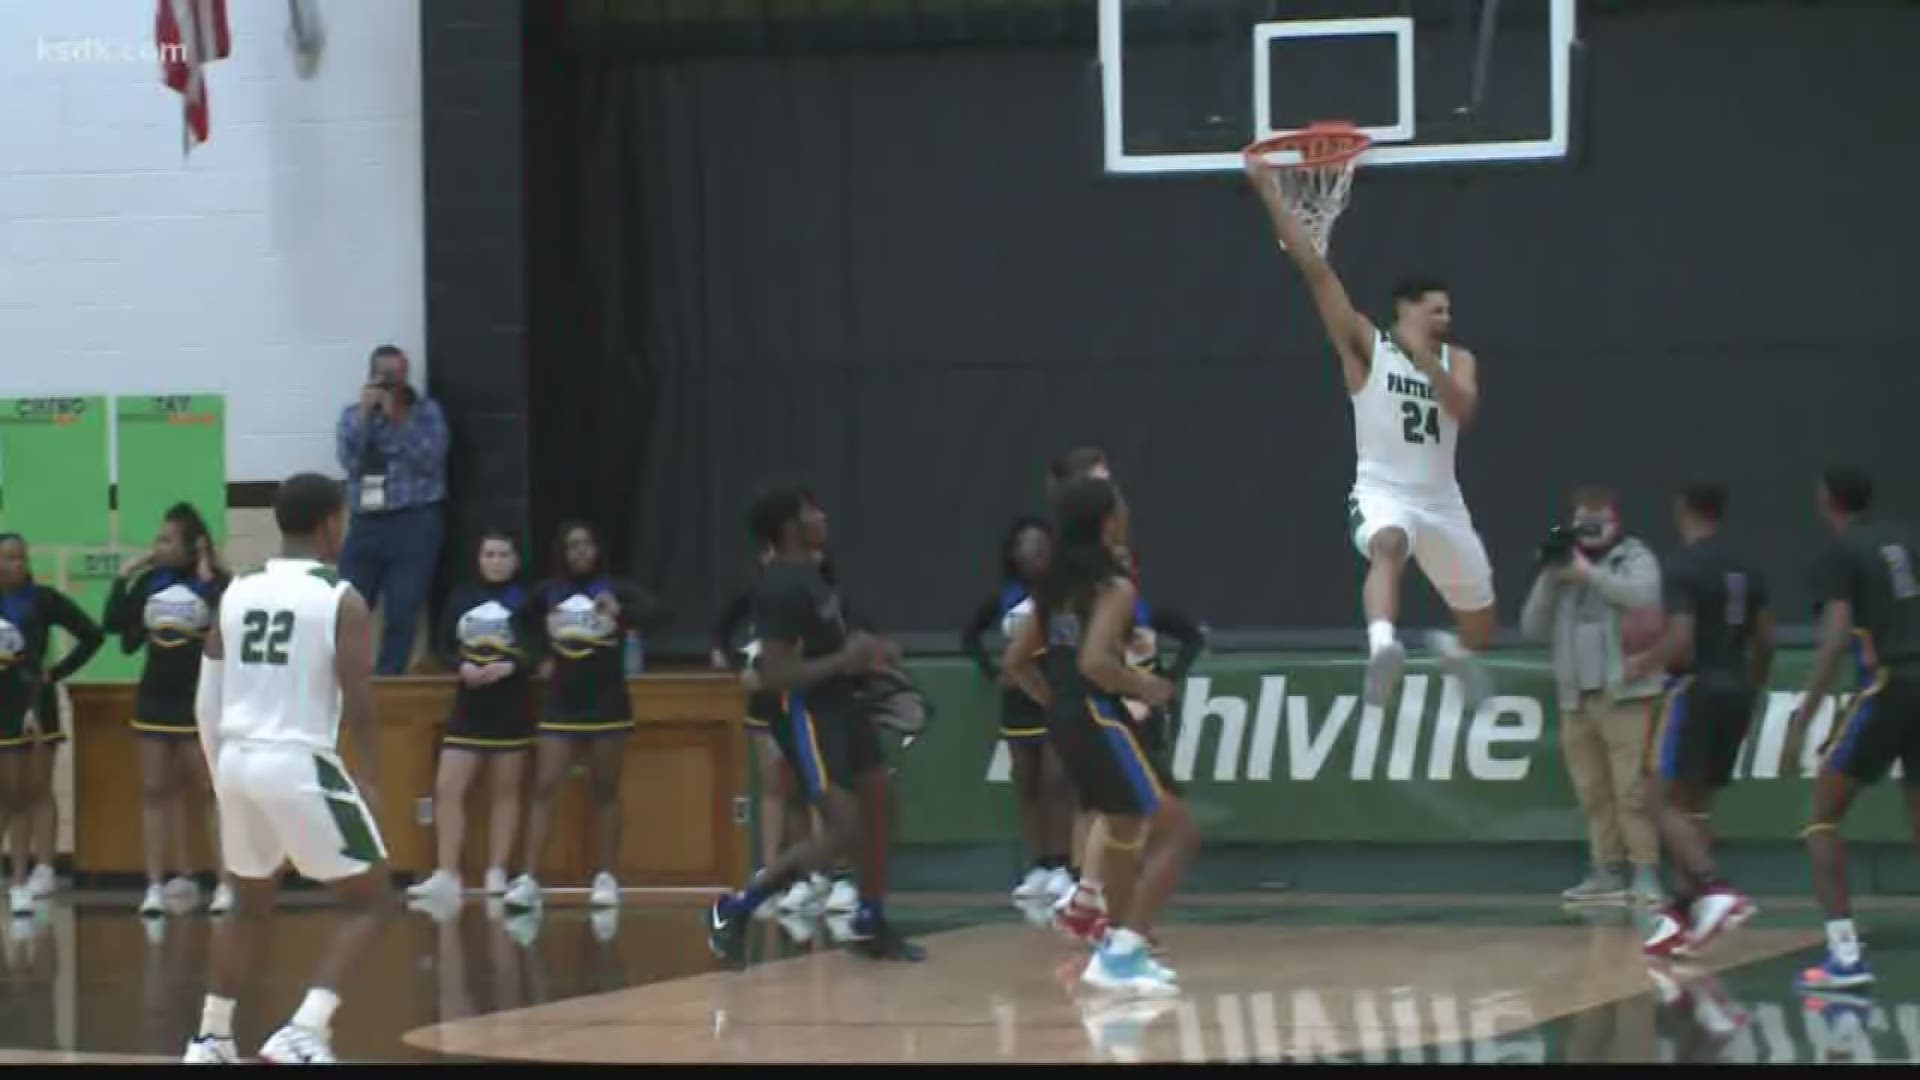 Mehlville would win 83-54.